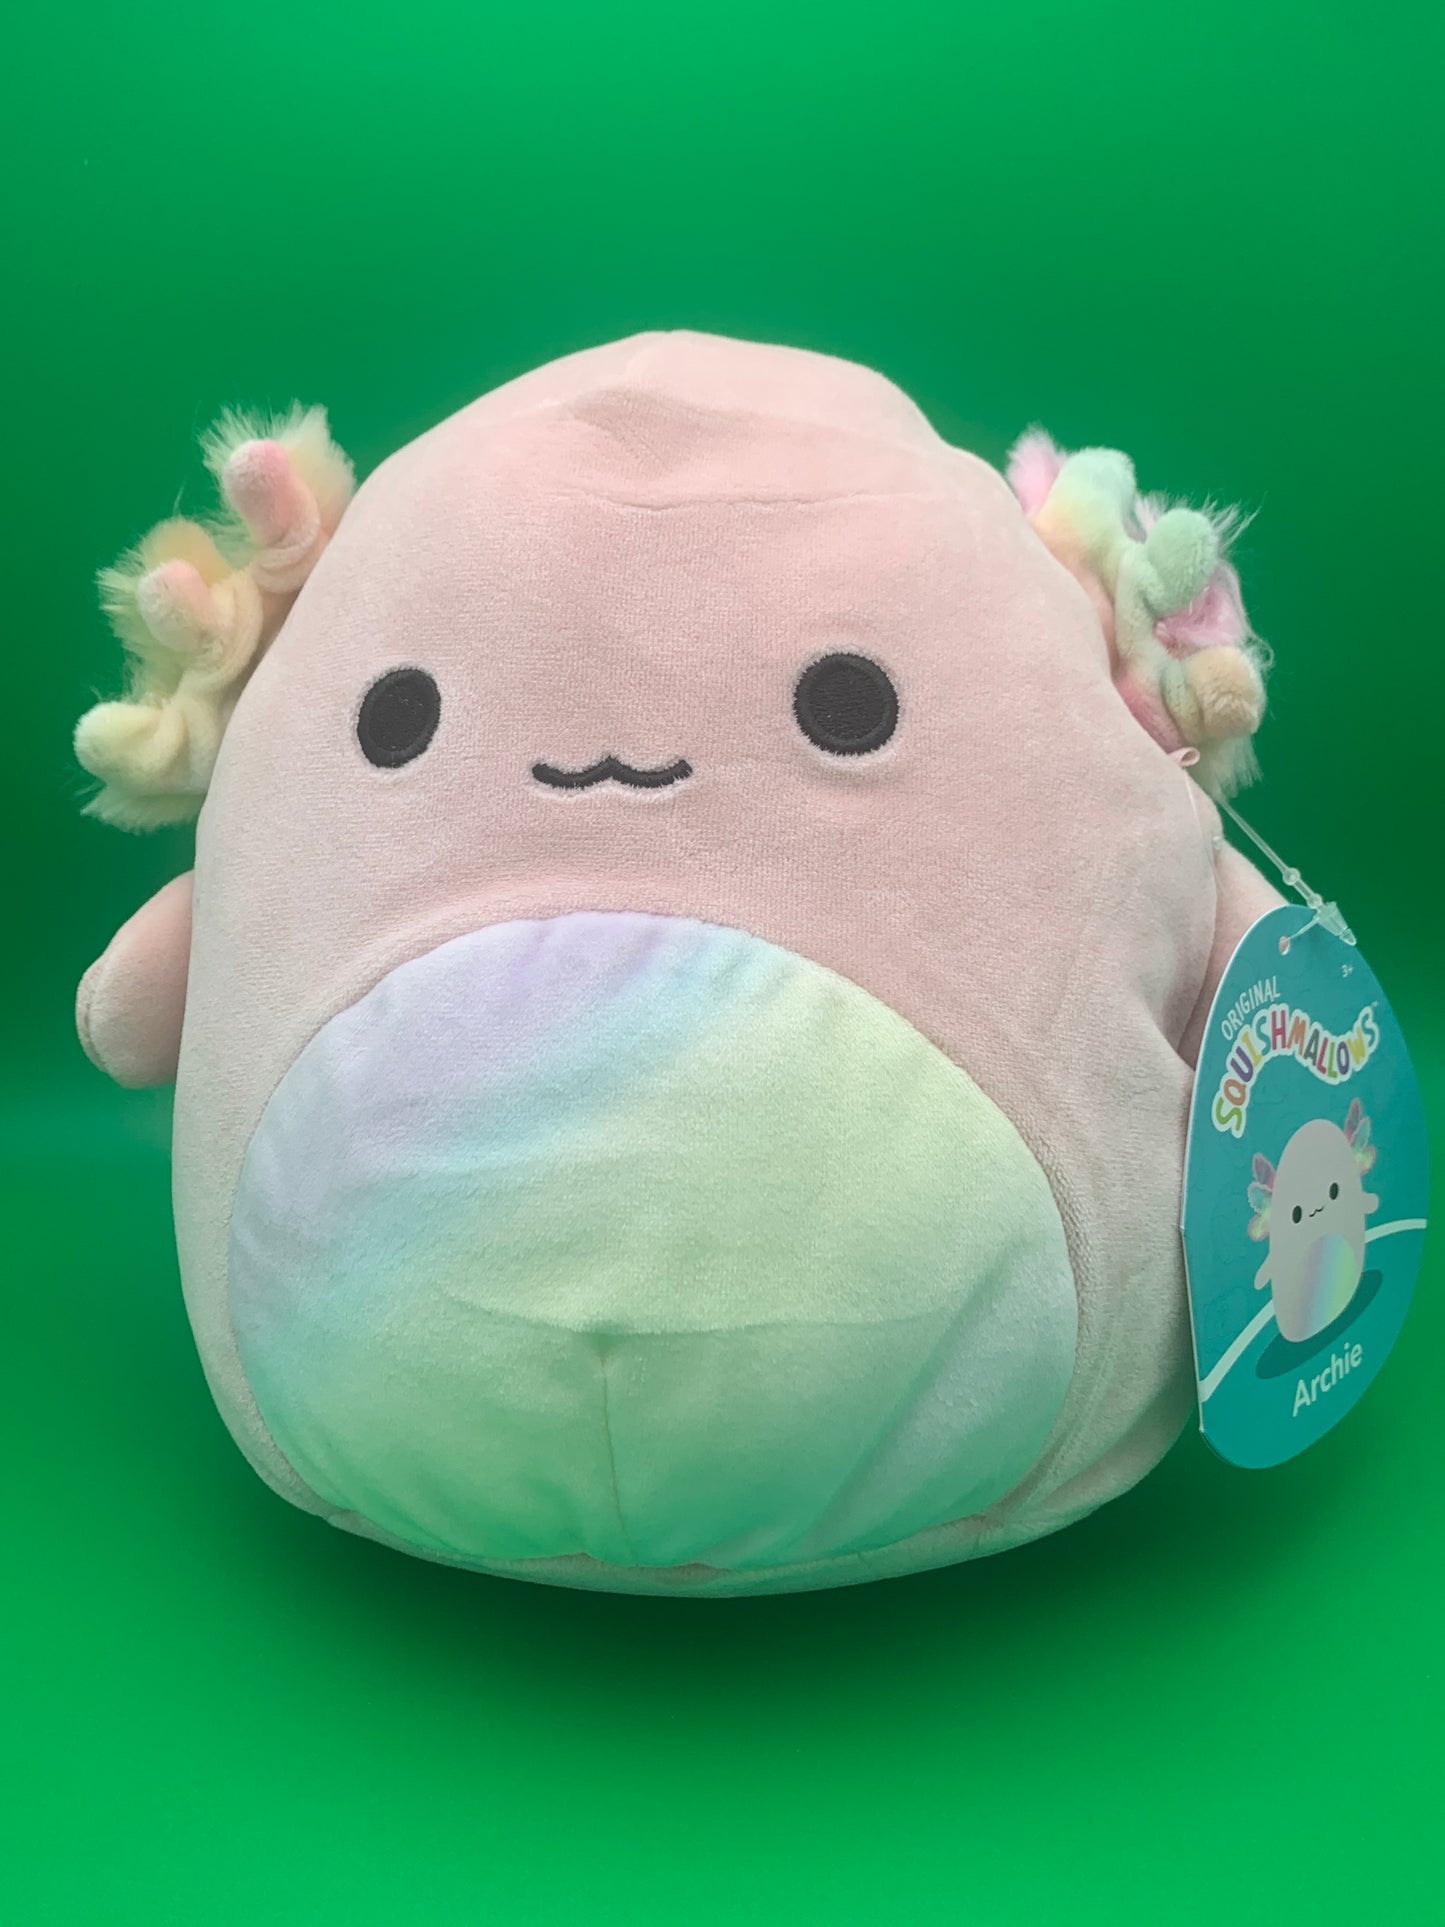 Squishmallow Archie the Axolotl Rainbow Belly 7.5 inch